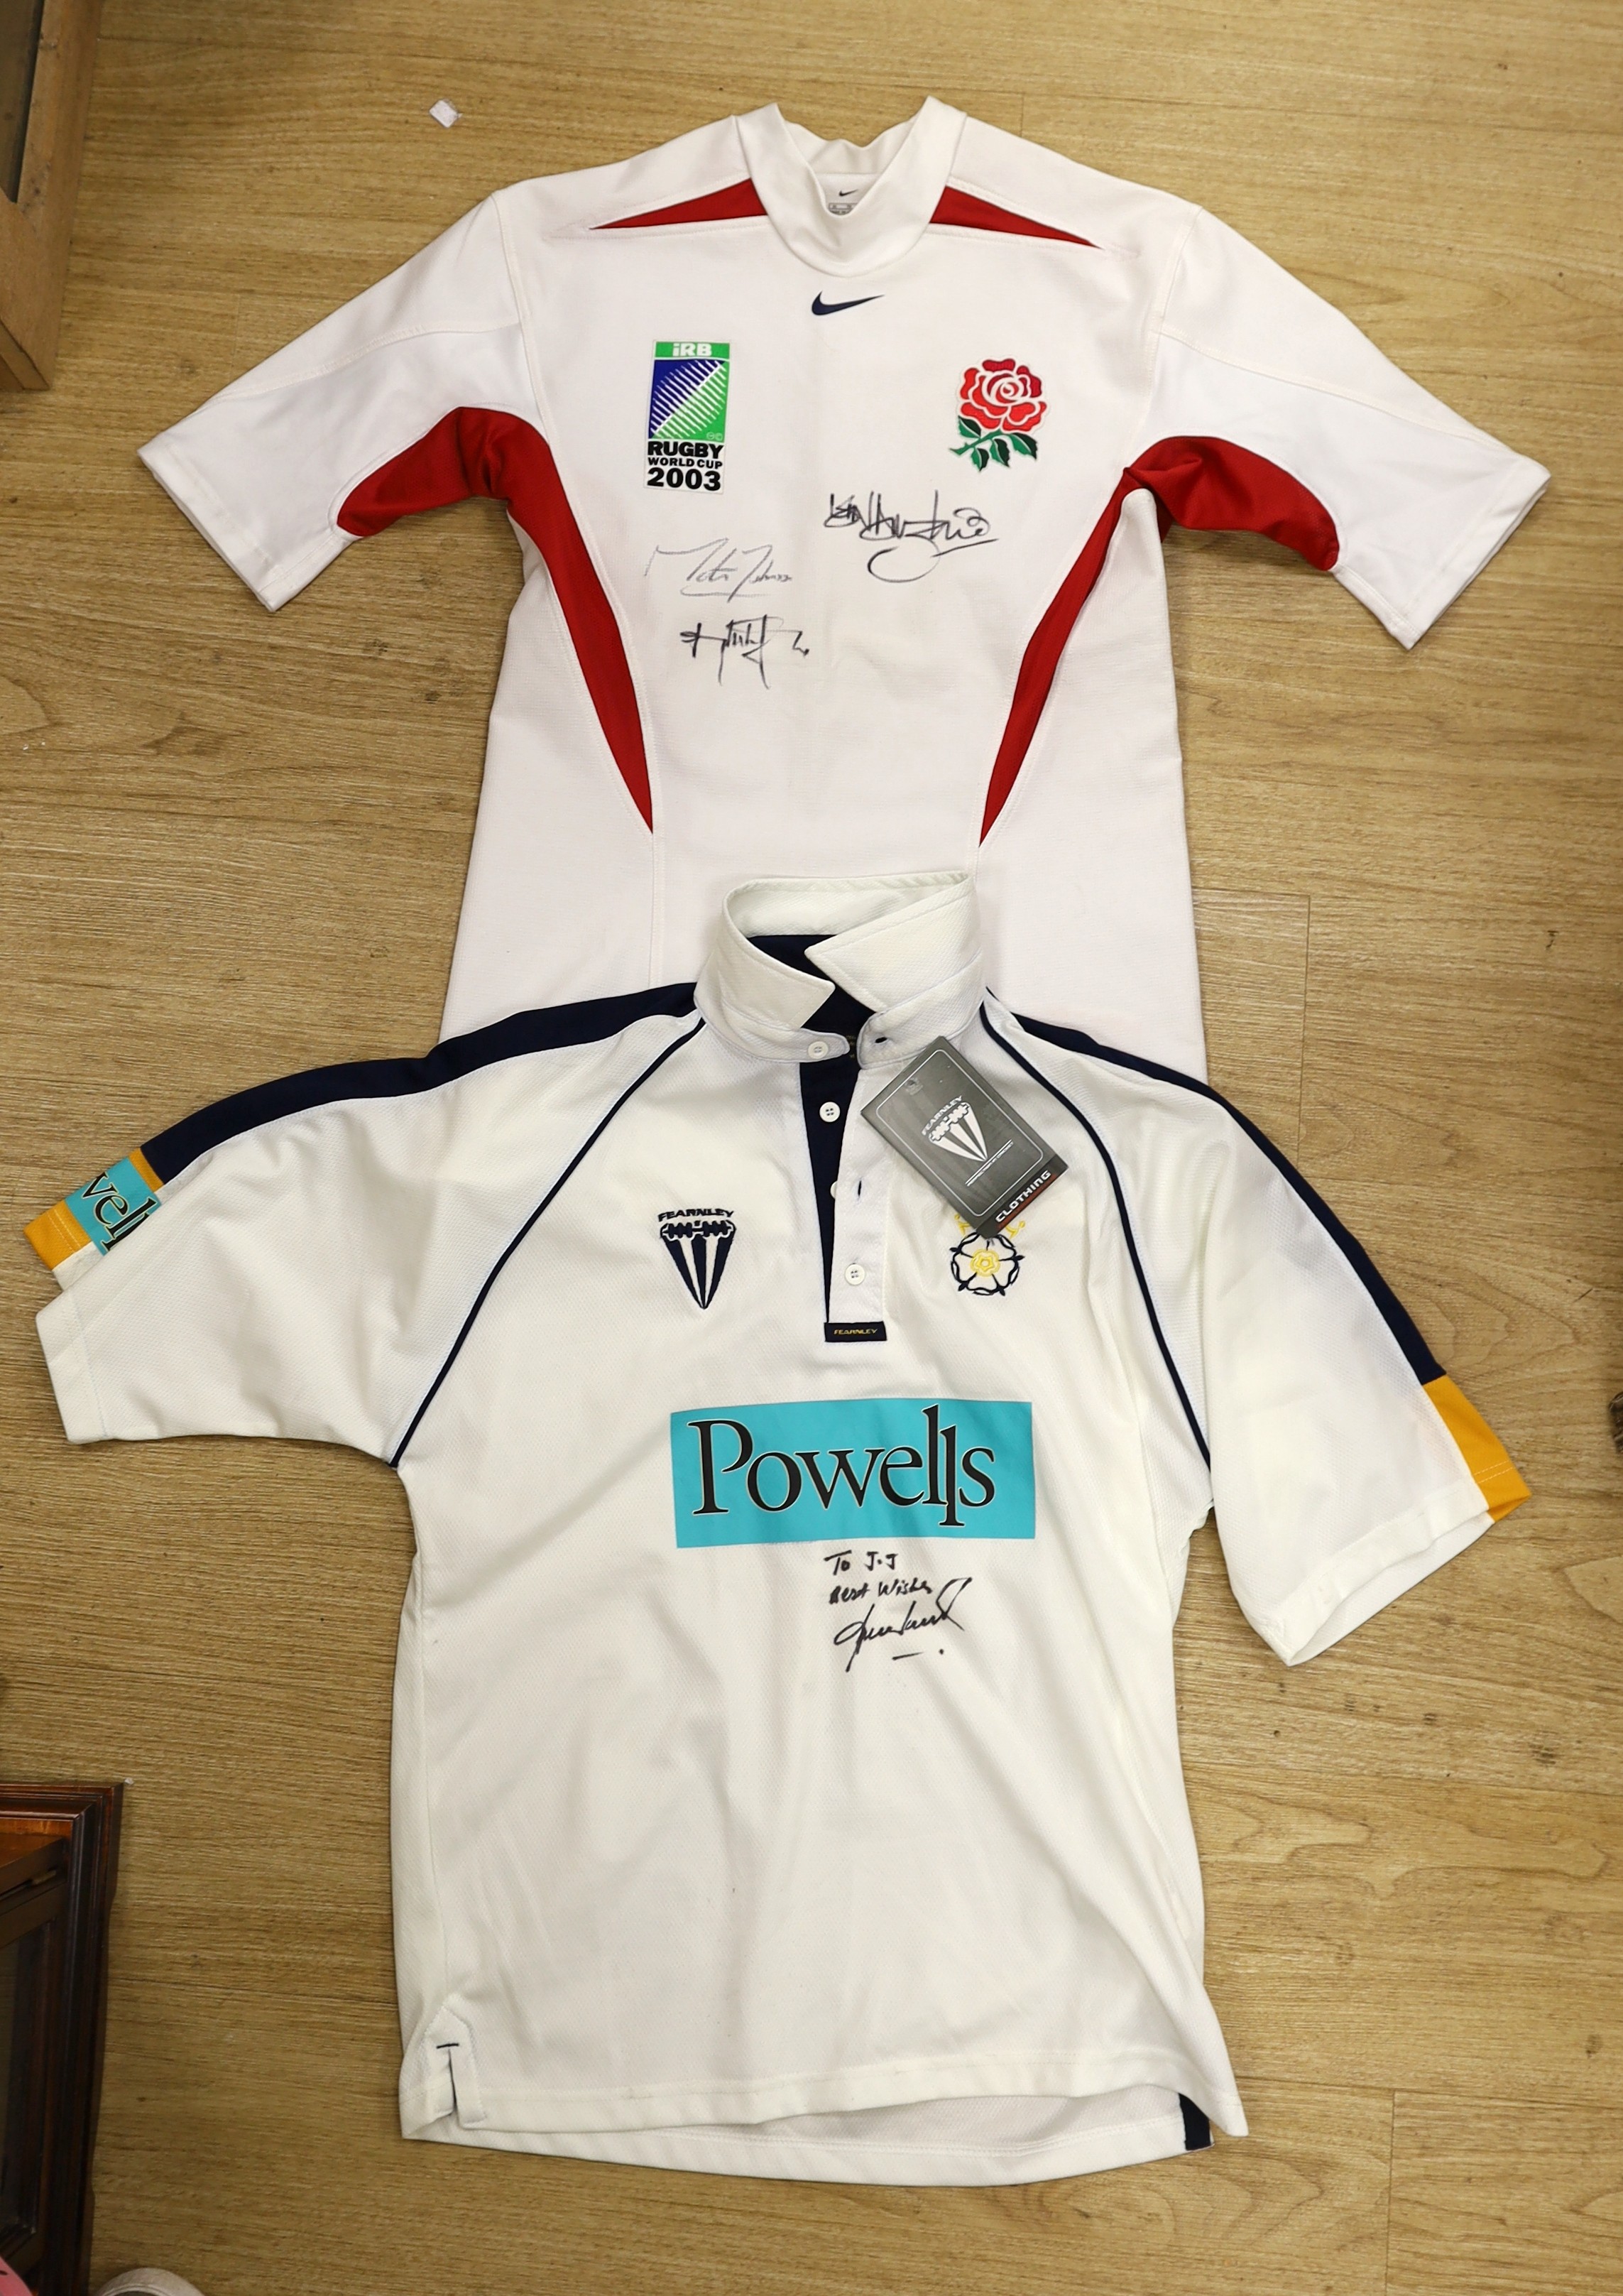 An England Rugby World Cup 2003 shirt signed by Martin Johnson, and two other players and a Hampshire county cricket club shirt signed to JJ best wishes